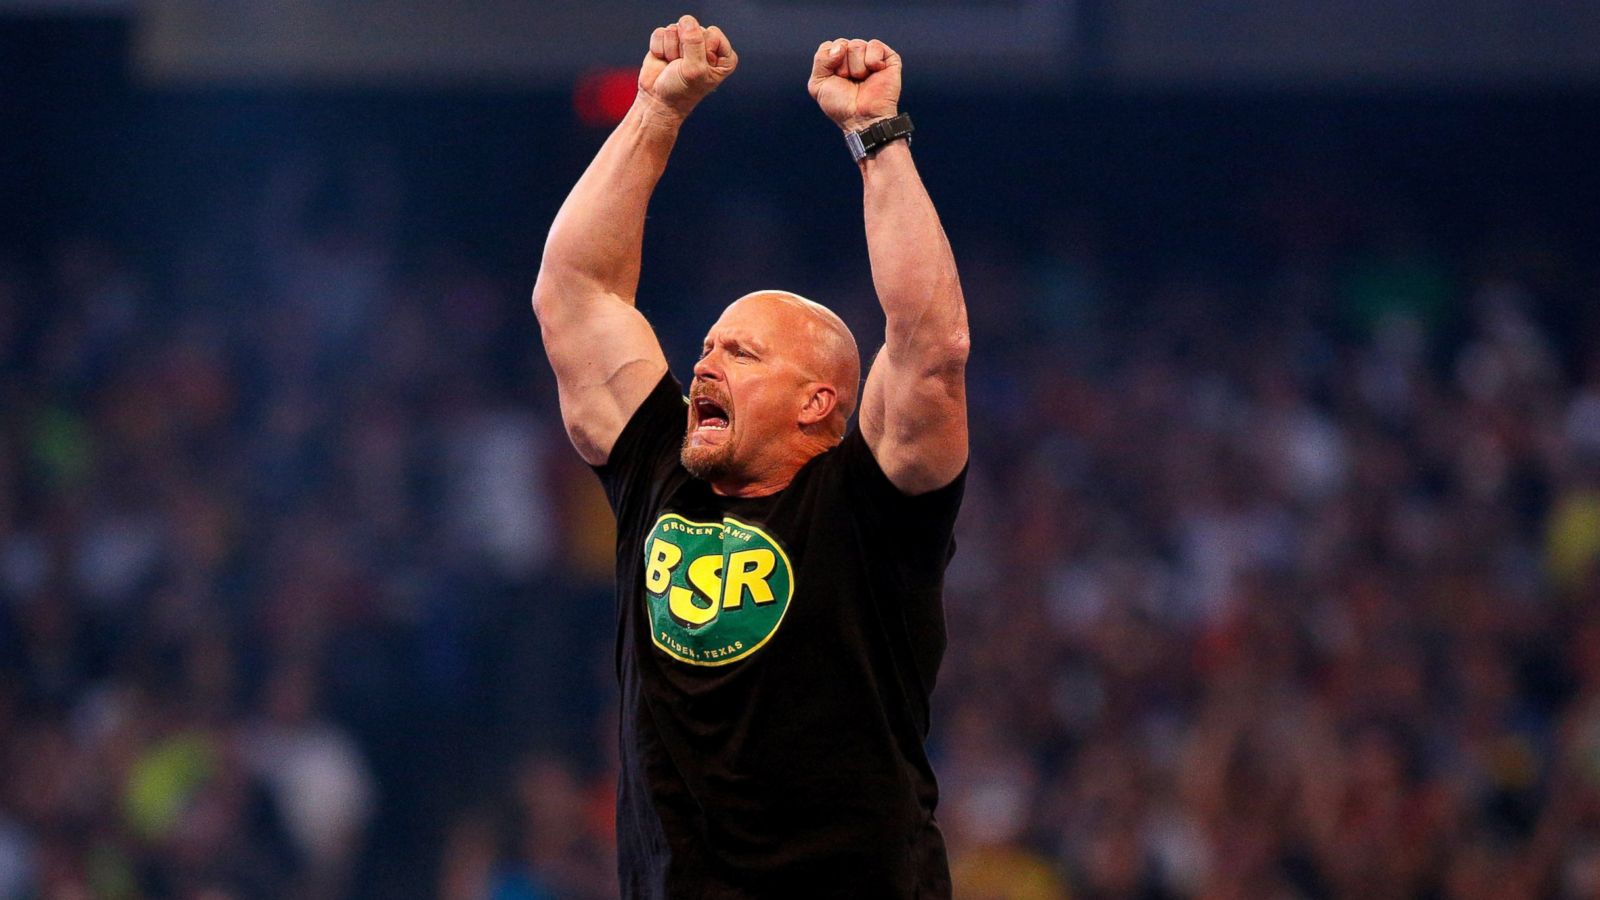 Stone Cold Steve Austin and few WWE Superstars Who Retired Early and Stayed That Way